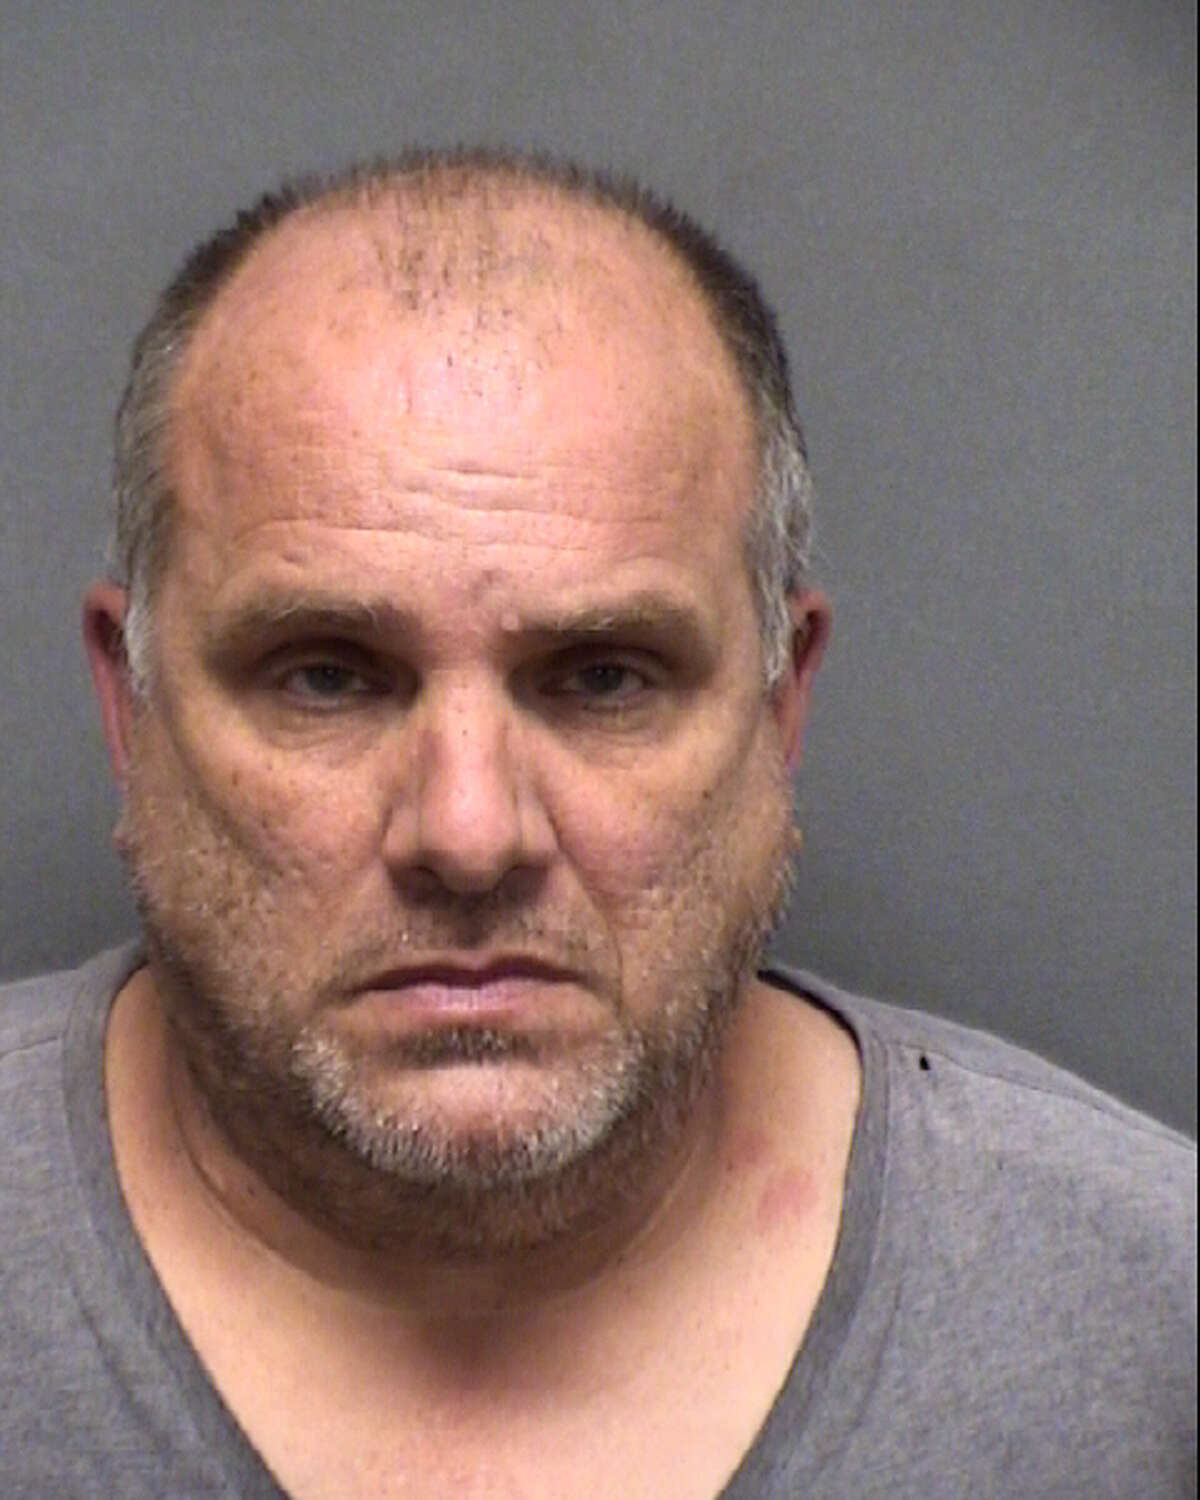 William Bender, 55, was charged with making terroristic threats after the pastor at the Episcopal Church of the Holy Spirit reported to police that he was sending aggressive emails.